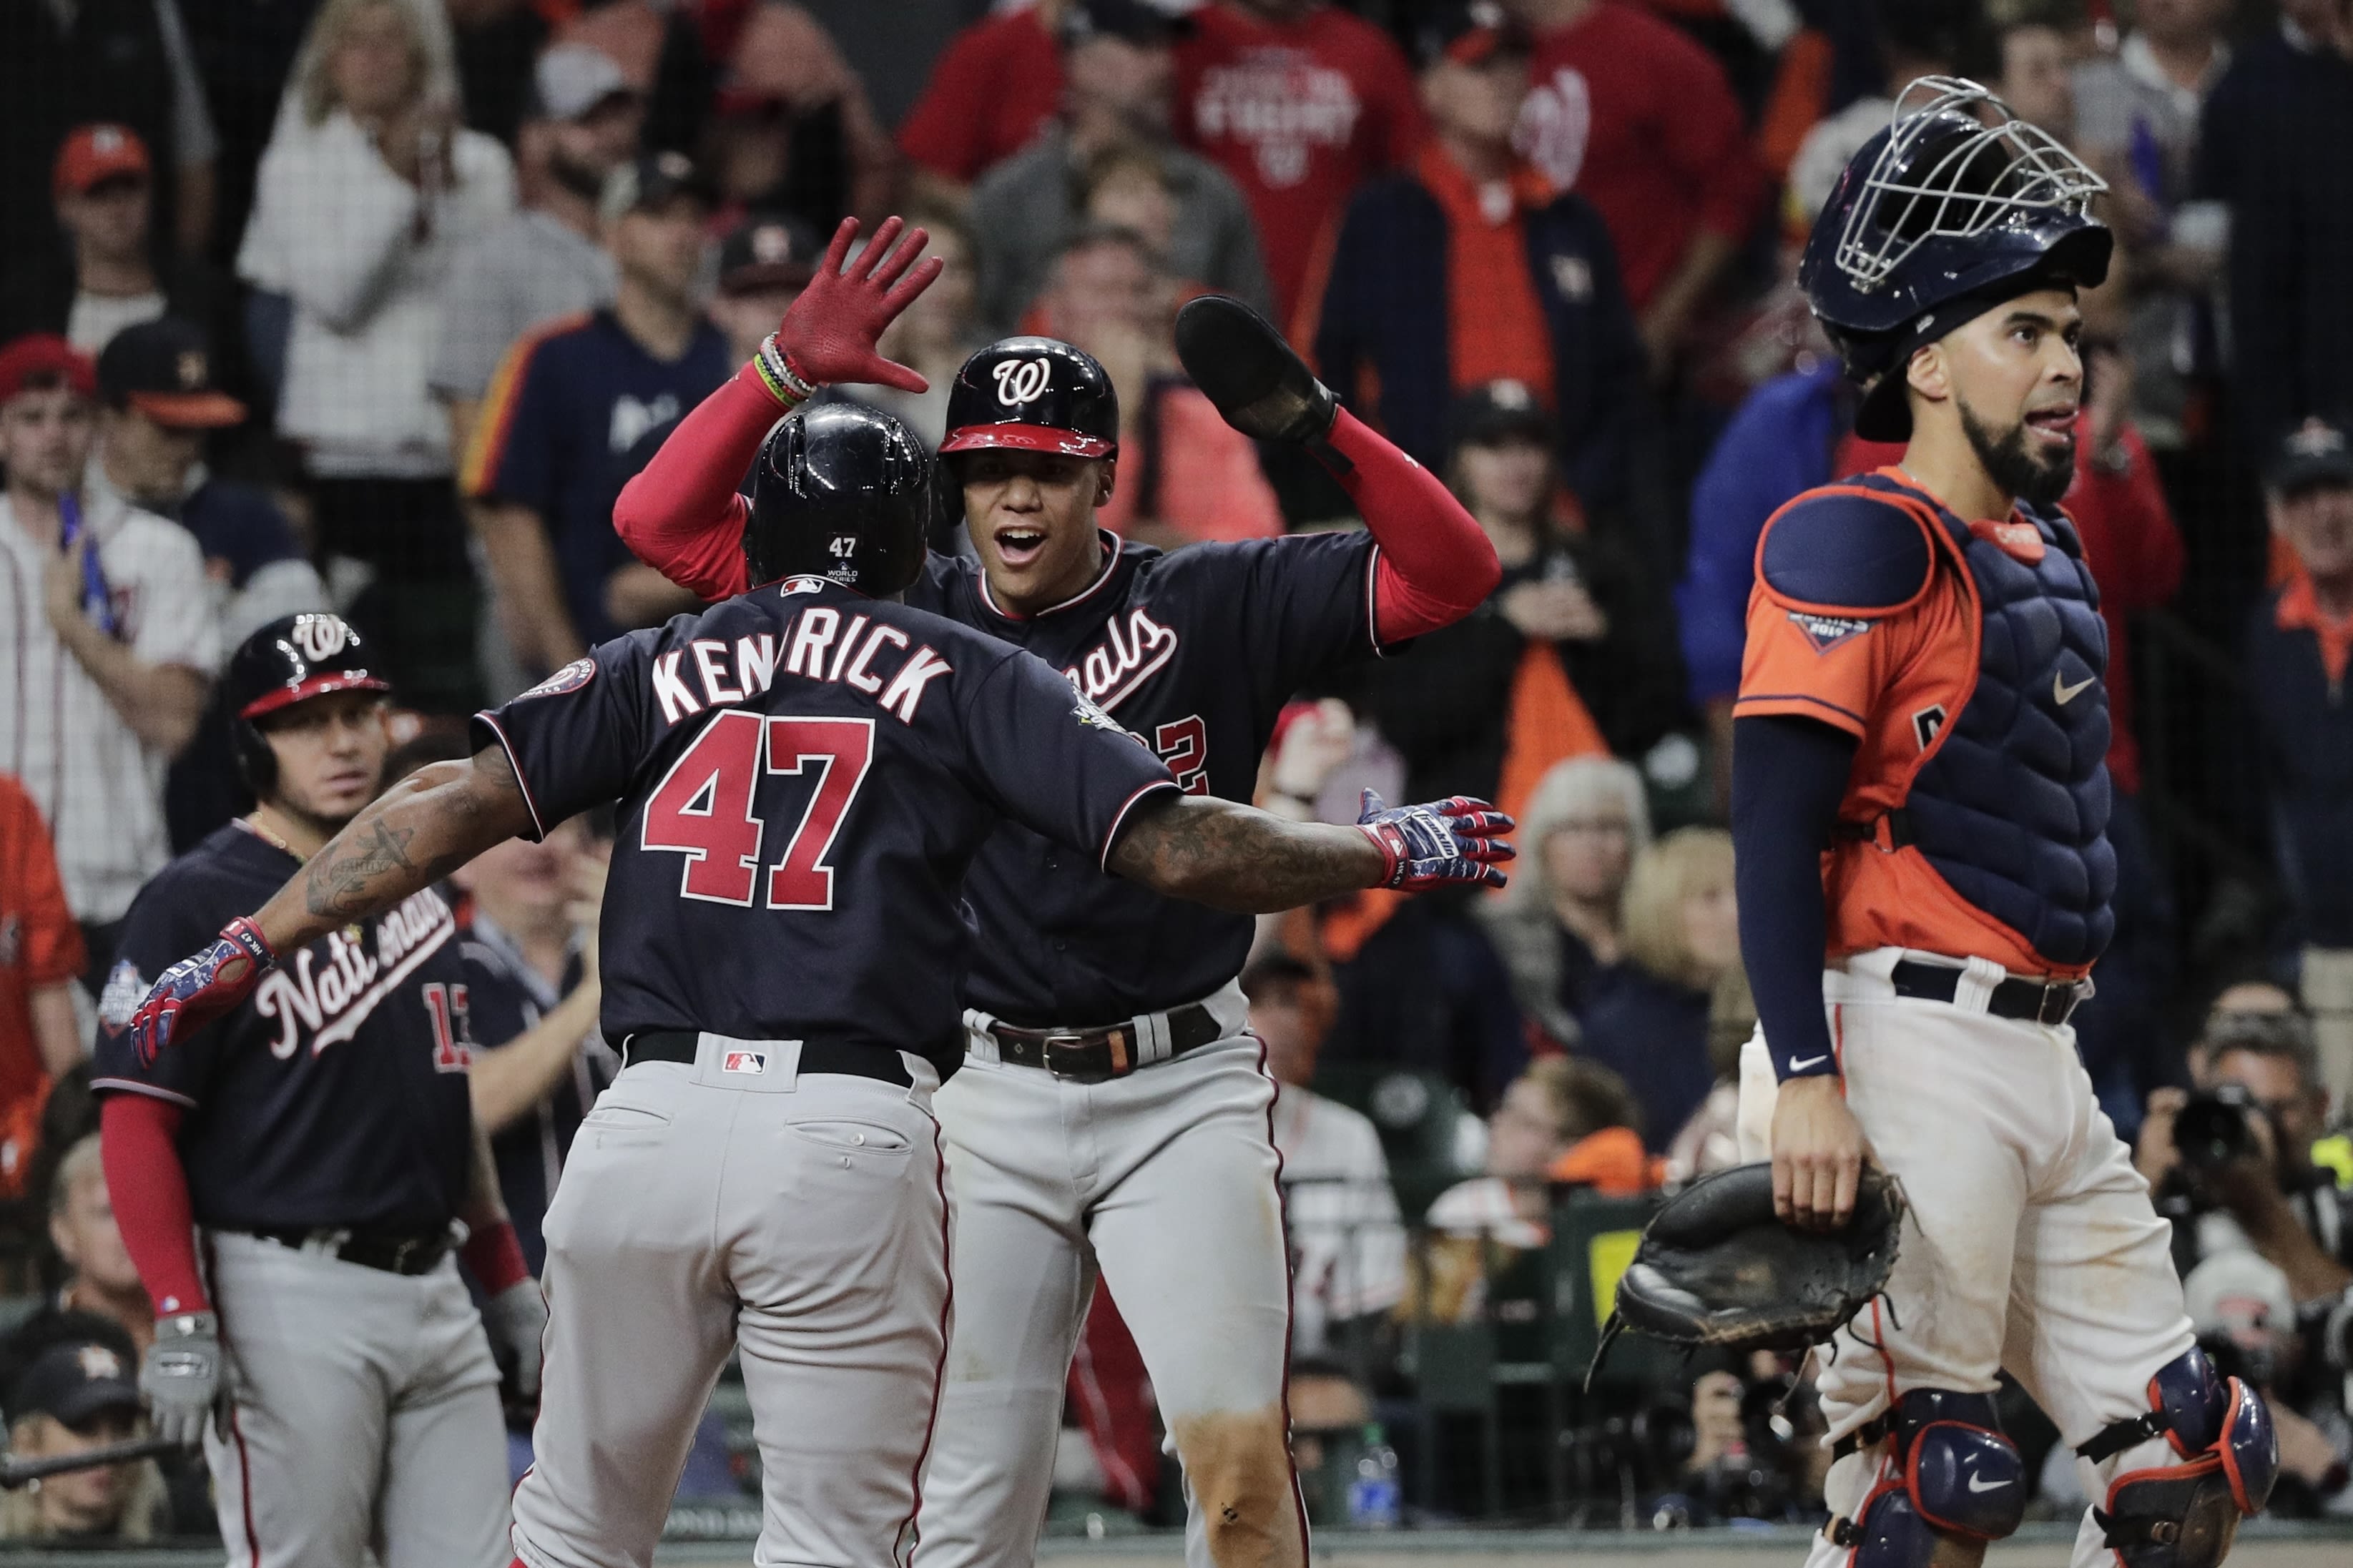 Washington Nationals beat Houston Astros in Game 7 to win